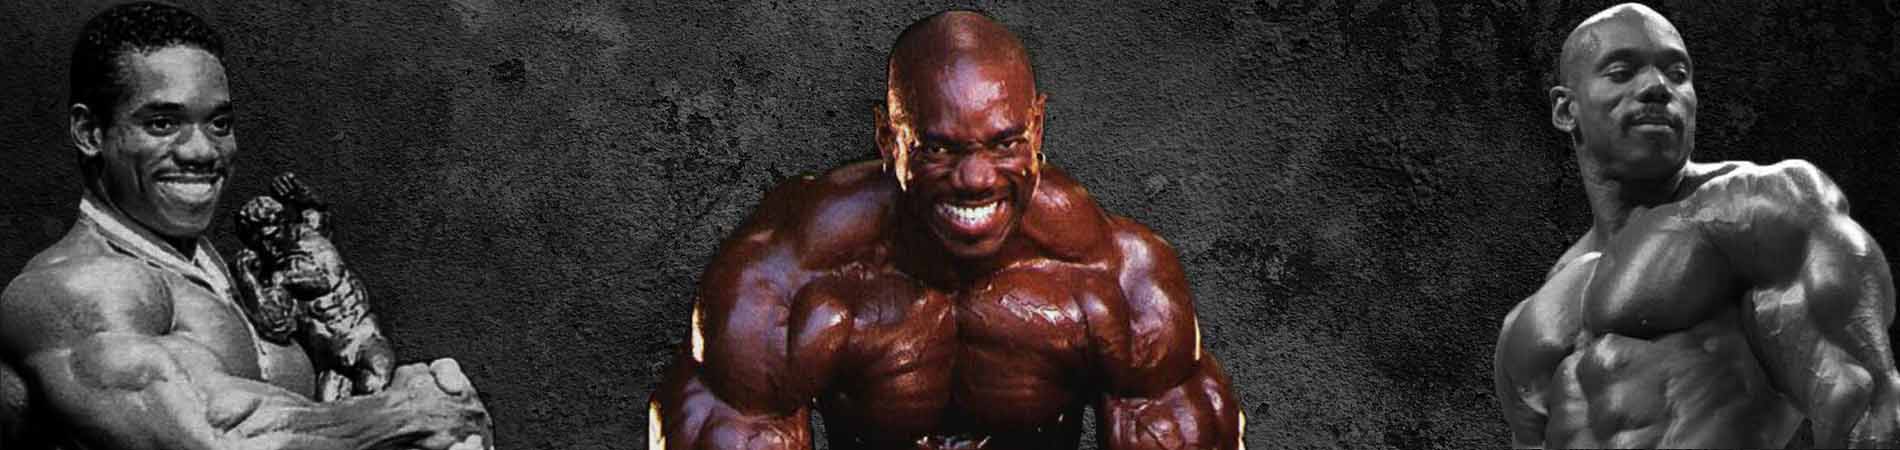 RARE PHOTO OF Flex Wheeler's FIRST EVER PRO SHOW 1st PLACE - YouTube